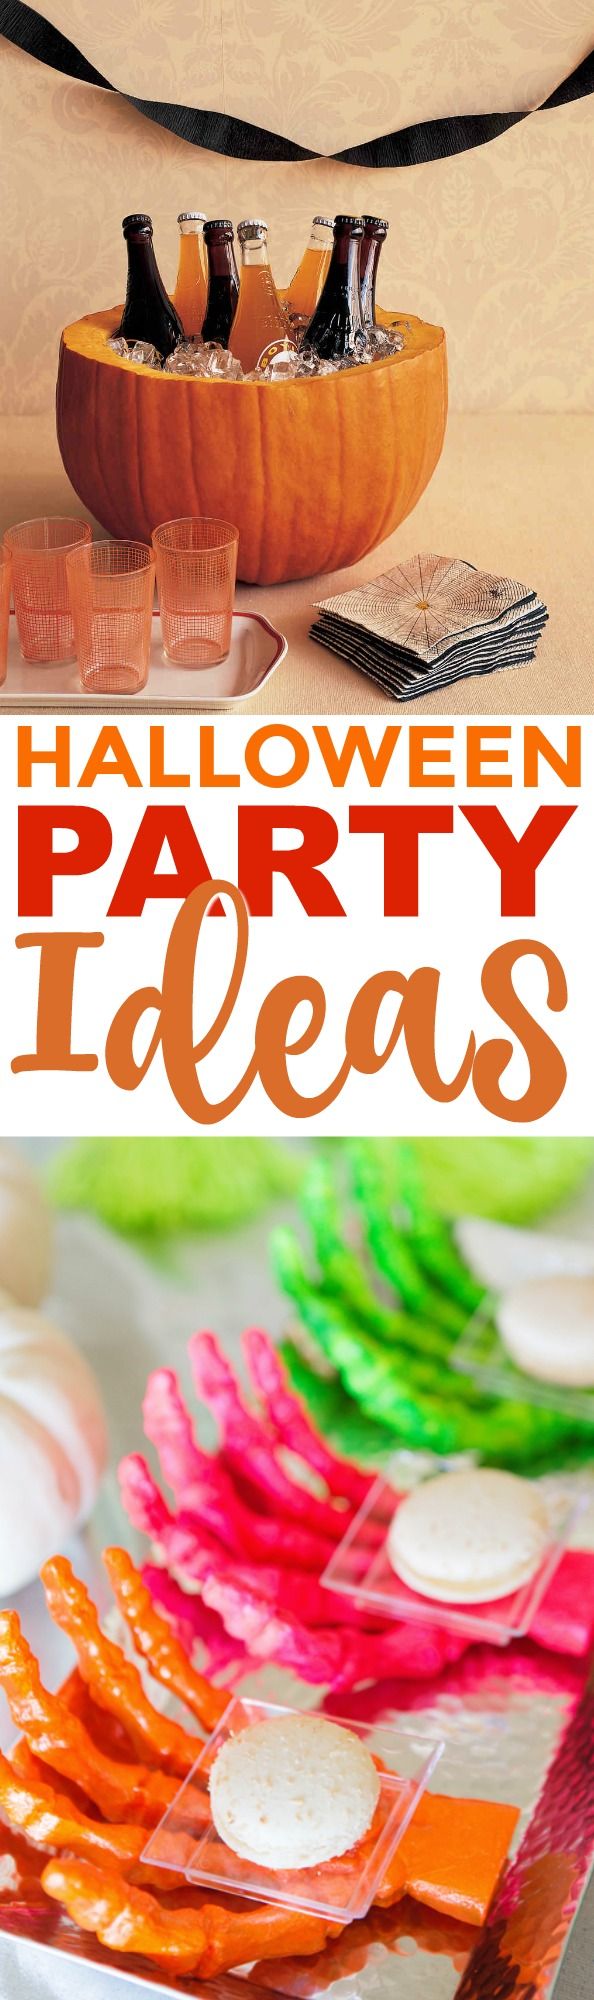 These Halloween ideas will surely spice up your party and add a special touch to...